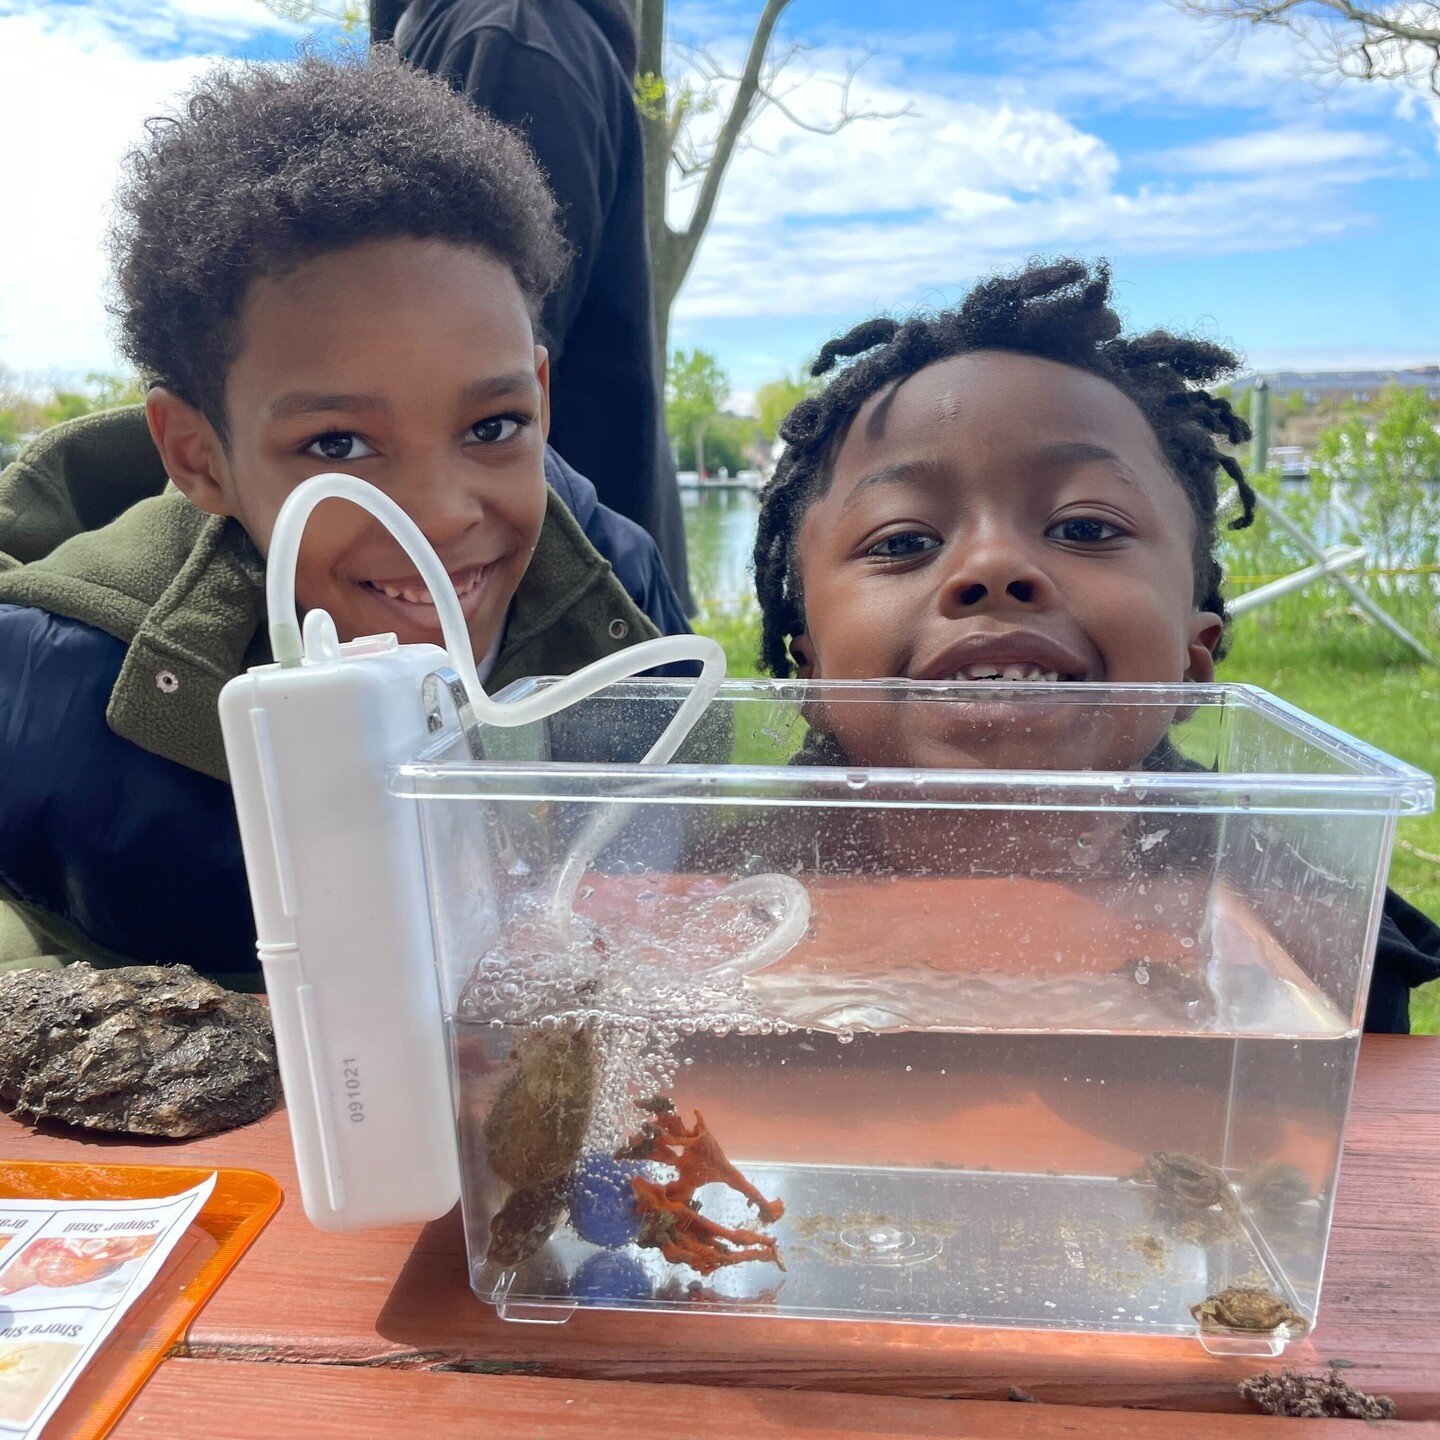 Big thank you to the curious and creative students from New Bridges Academy for joining us at our Canarsie Field Station to explore the underwater world of New York Harbor! Its inspiring to see your enthusiasm and the beautiful artwork you created wh